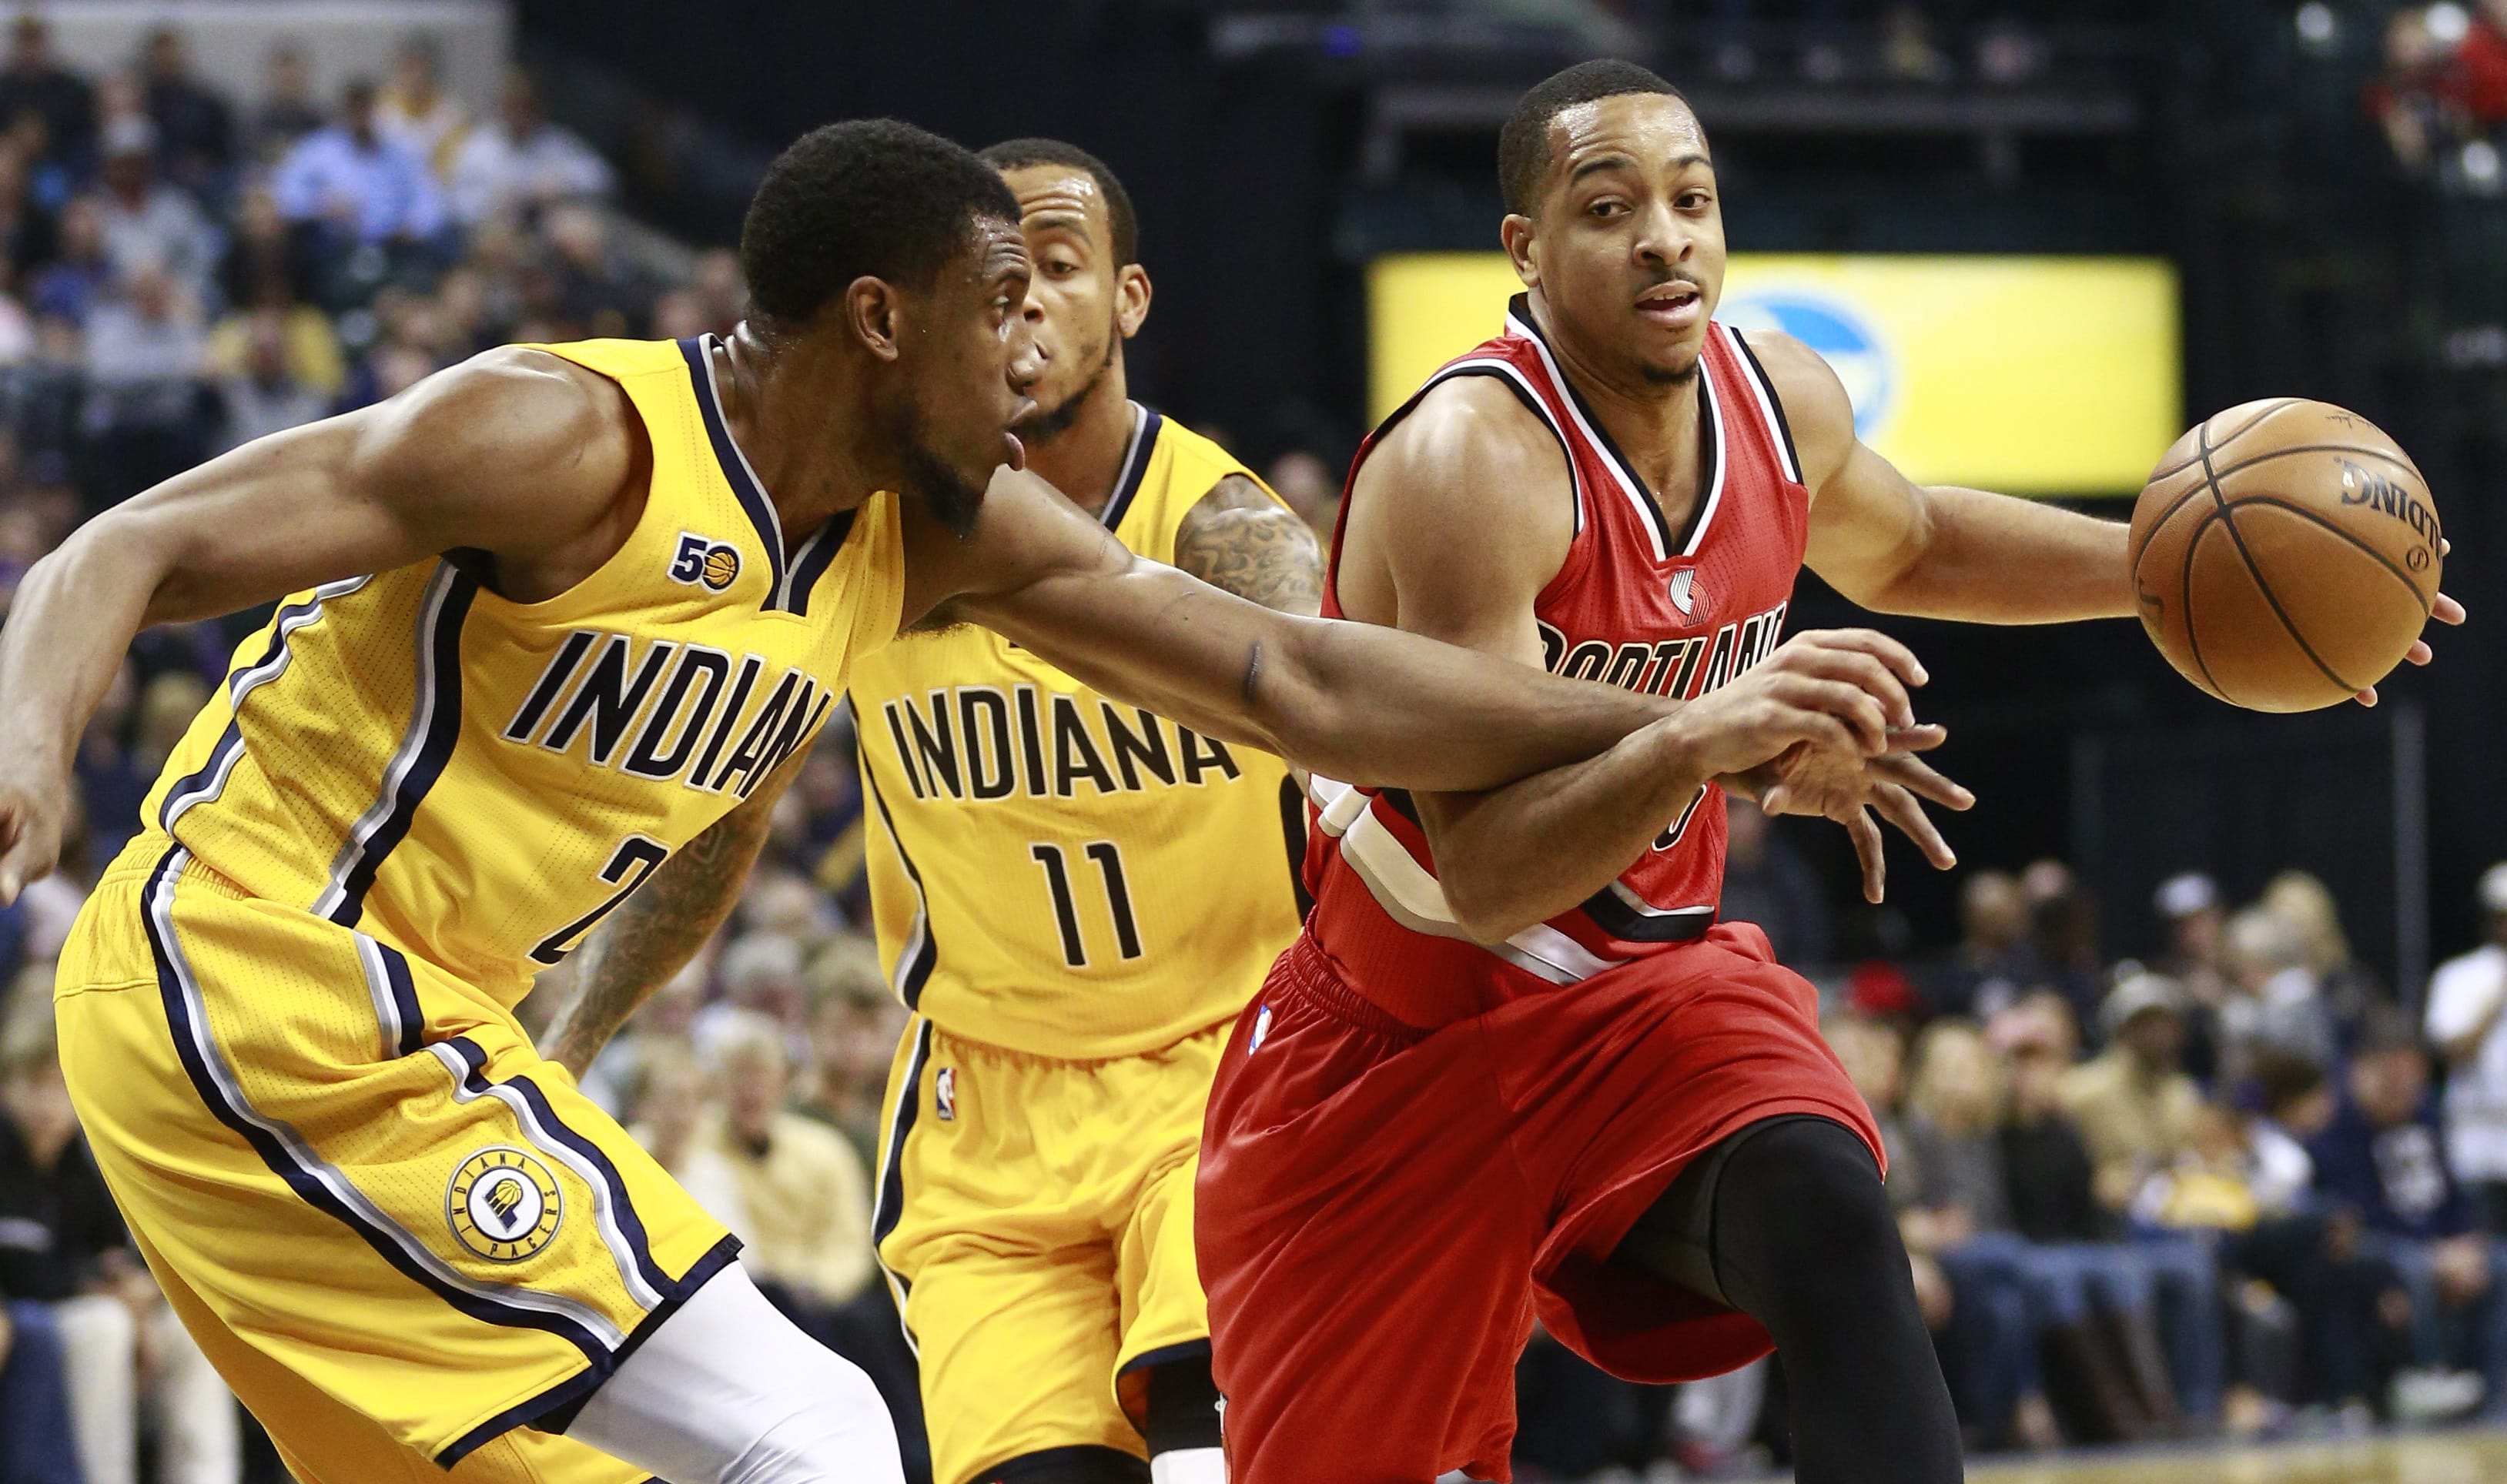 Indiana Pacers forward Thaddeus Young, left, gets a hand on Portland Trail Blazers guard C.J. McCollum, right, while Pacers guard Monta Ellis (11) trails the play in the first half of an NBA basketball game, Saturday, Dec. 10, 2016, in Indianapolis.